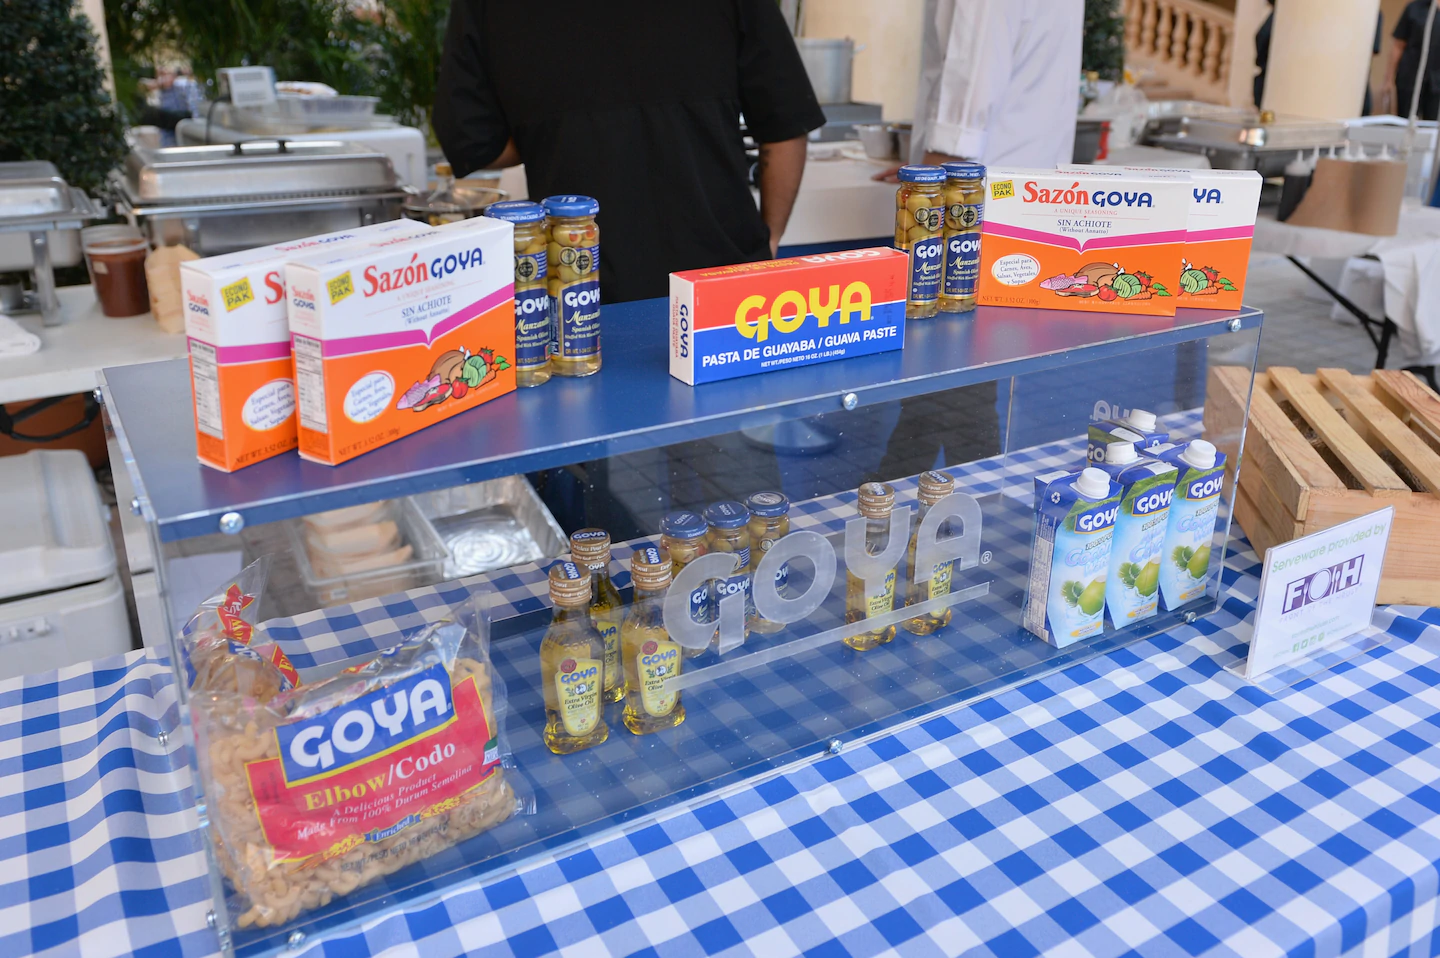 Goya’s CEO said the U.S. is ‘truly blessed’ with President Trump. Latinos are now boycotting.